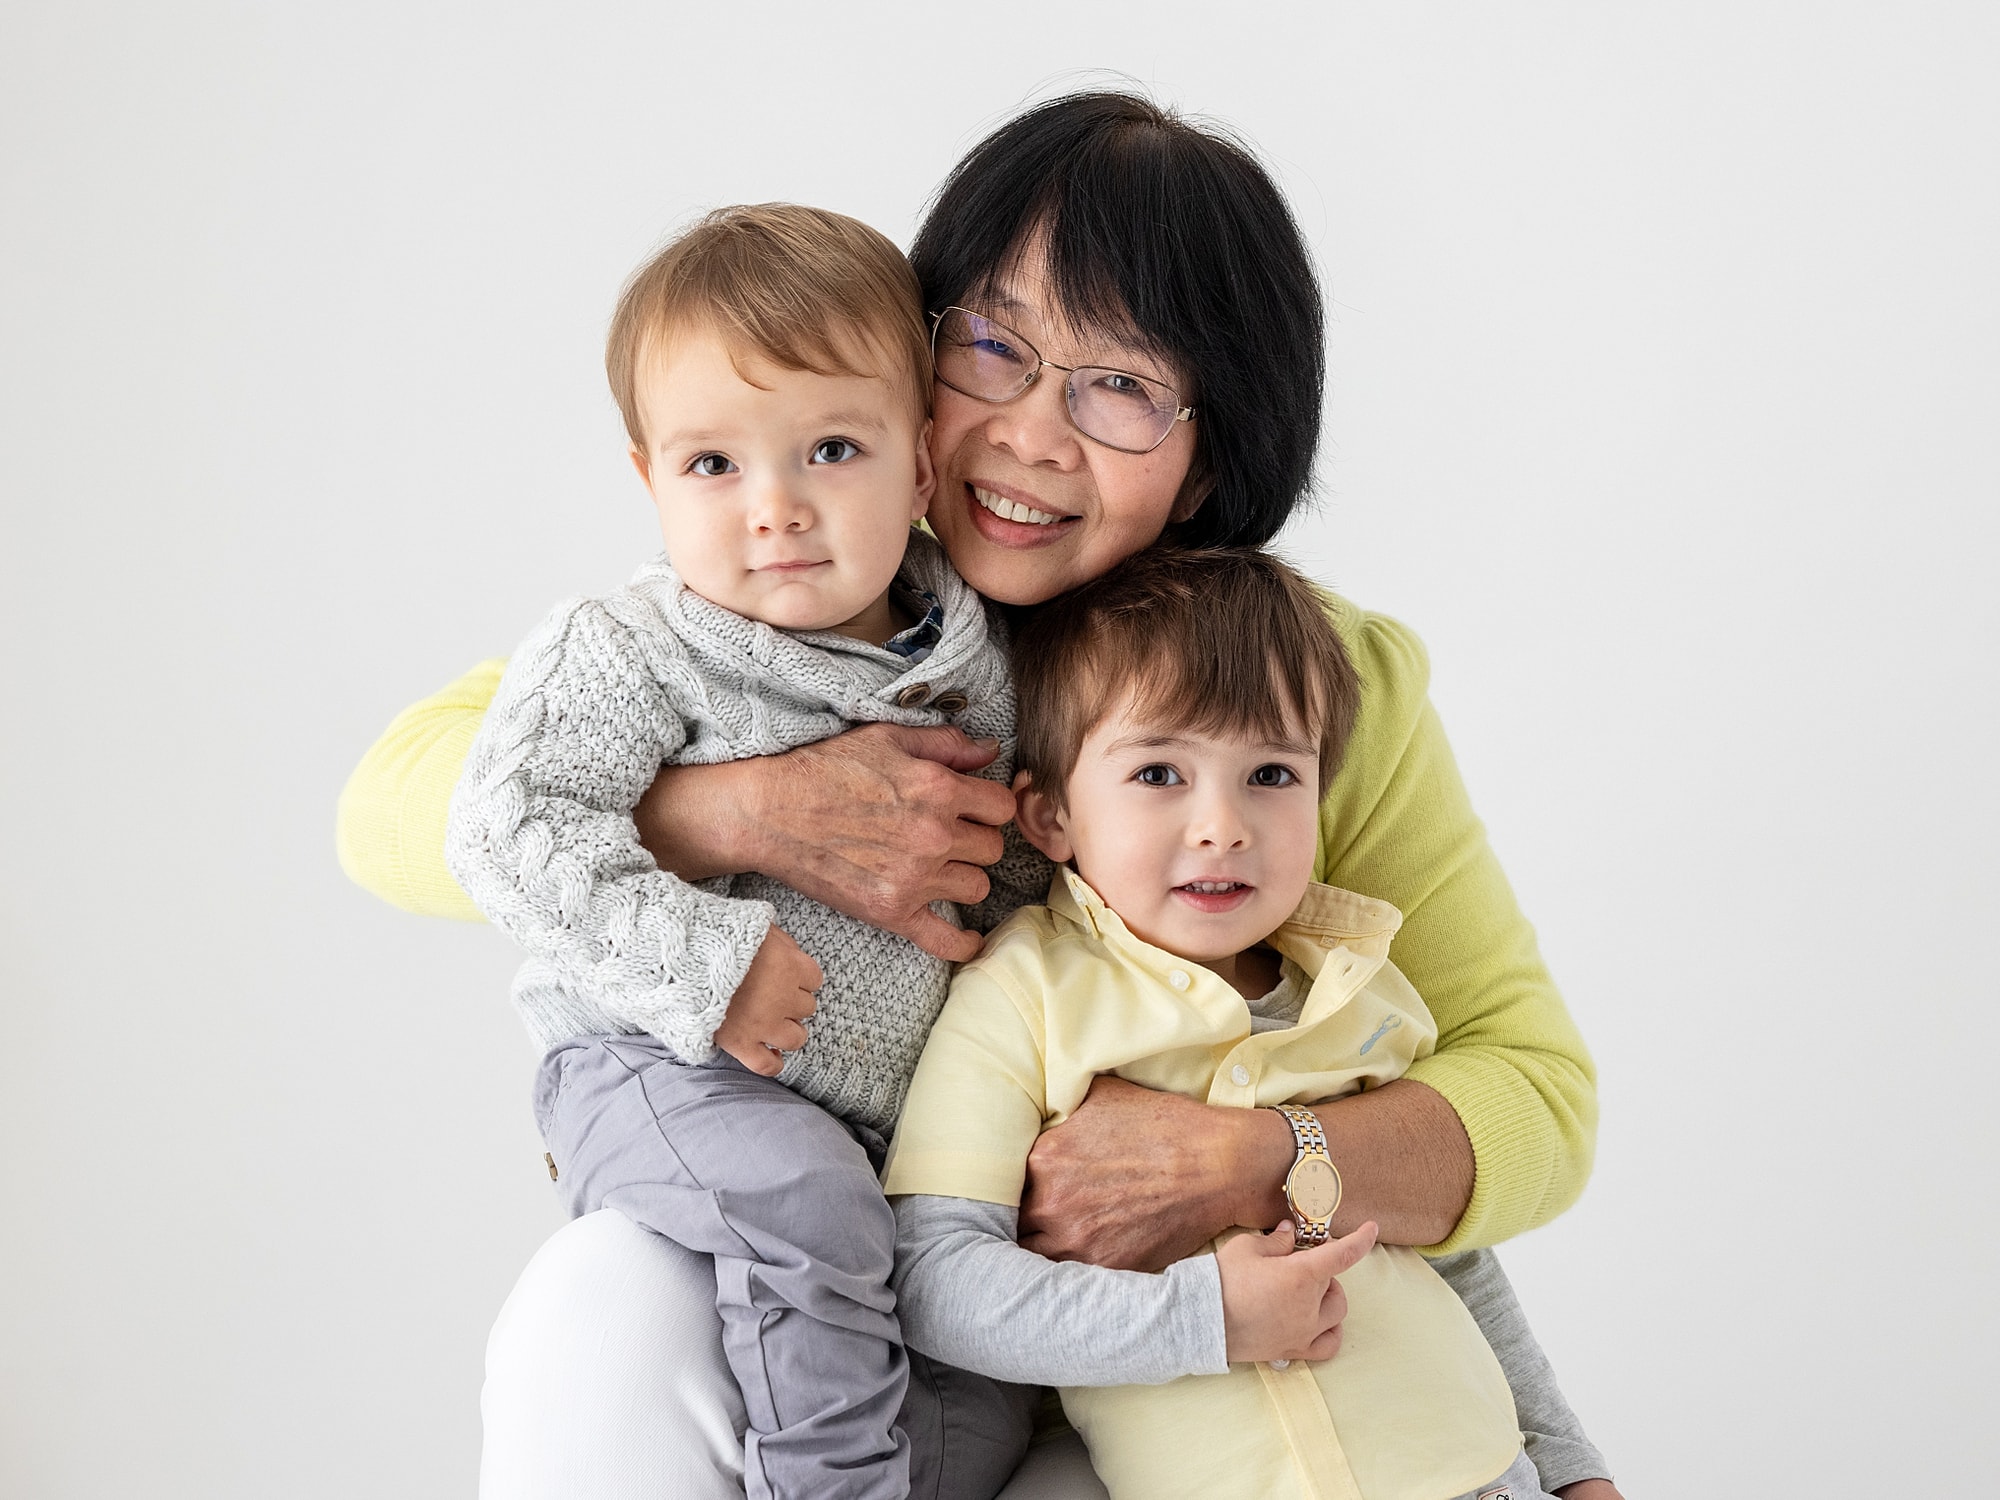 Granny cuddling her grandkids during family photoshoot